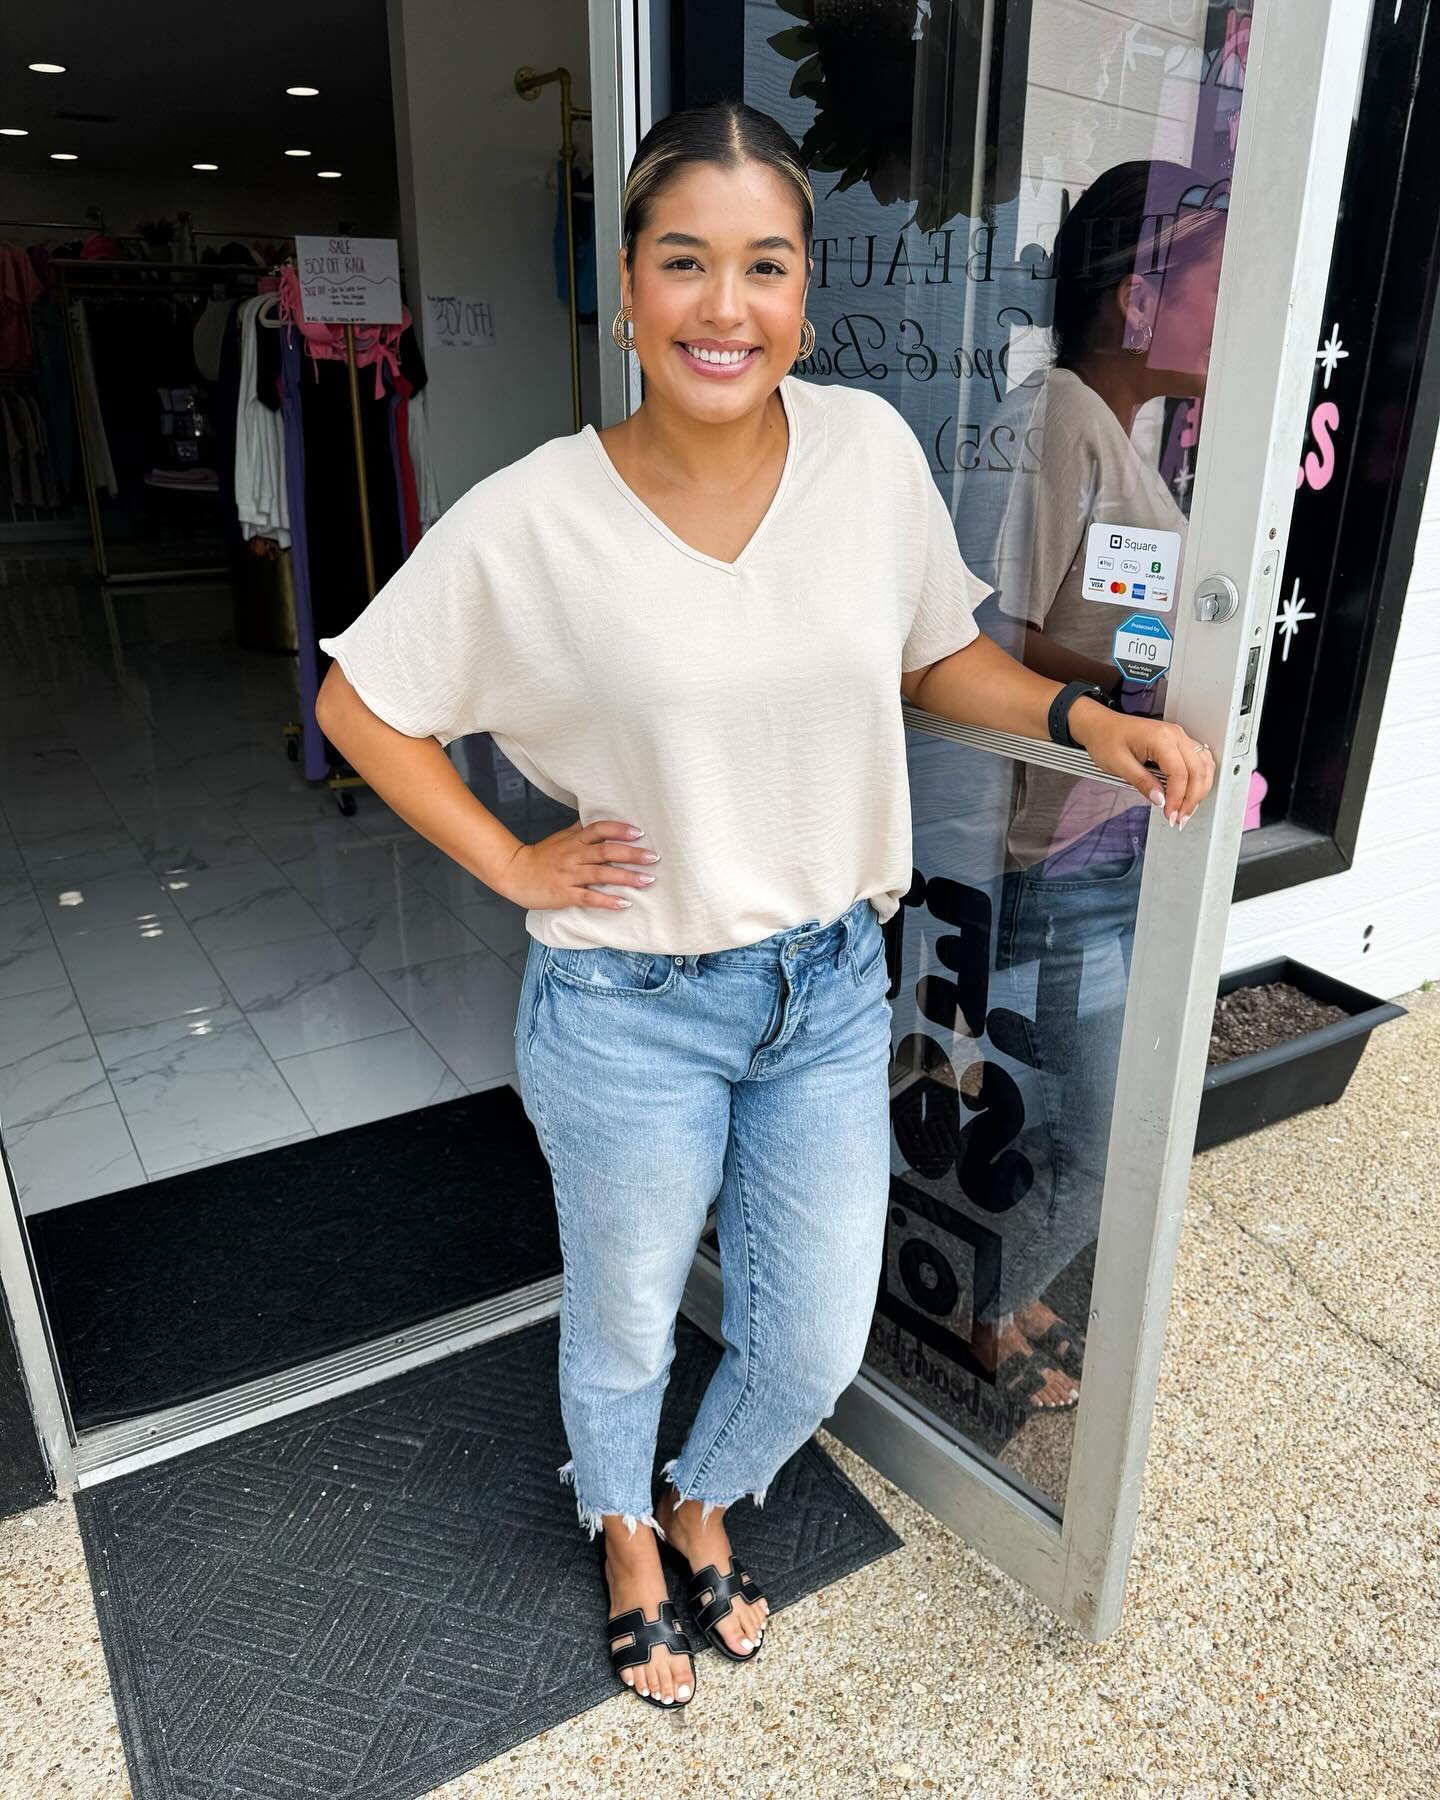 This classic top is always a favorite in any closet 💗

Snag this cute top today! We have smalls, mediums and larges left 🛍️

Check our pinned post for our May Specials &amp; our FIRST birthday party info! 💗 

#shoplocal #shopboutiques #shopthebeau